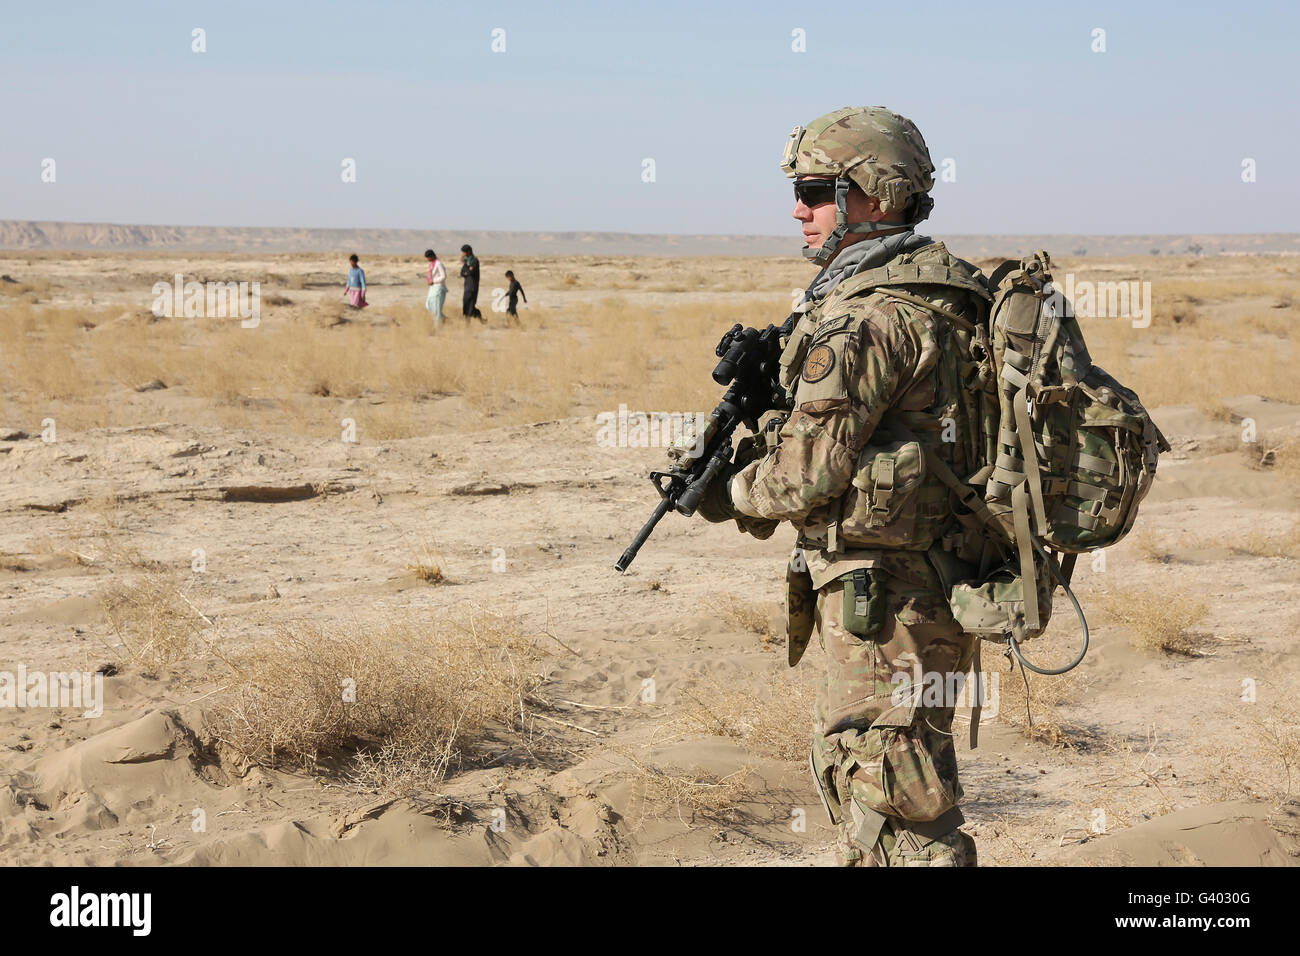 Petty Officer maintains security at a site in Afghanistan. Stock Photo